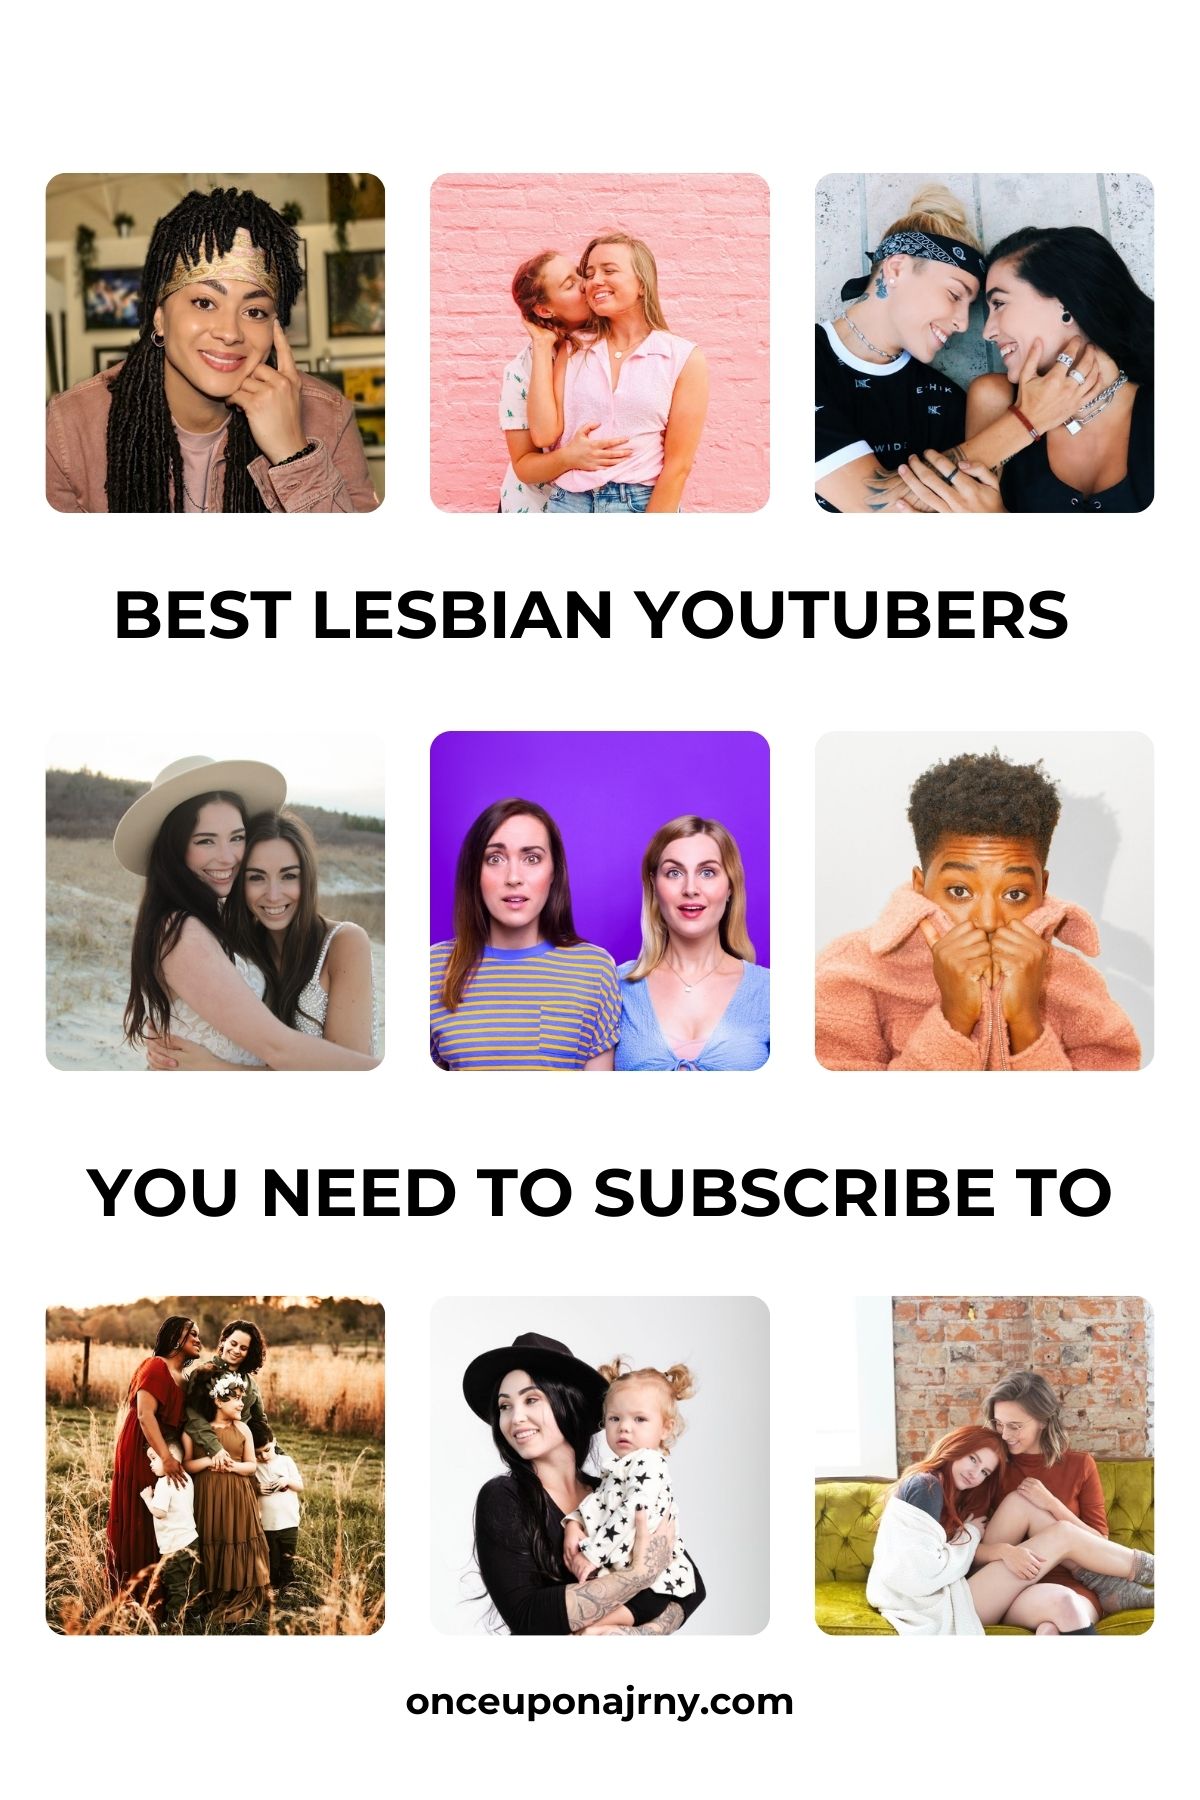 carolyn bayless recommends Lesbian Love Youtube Channel